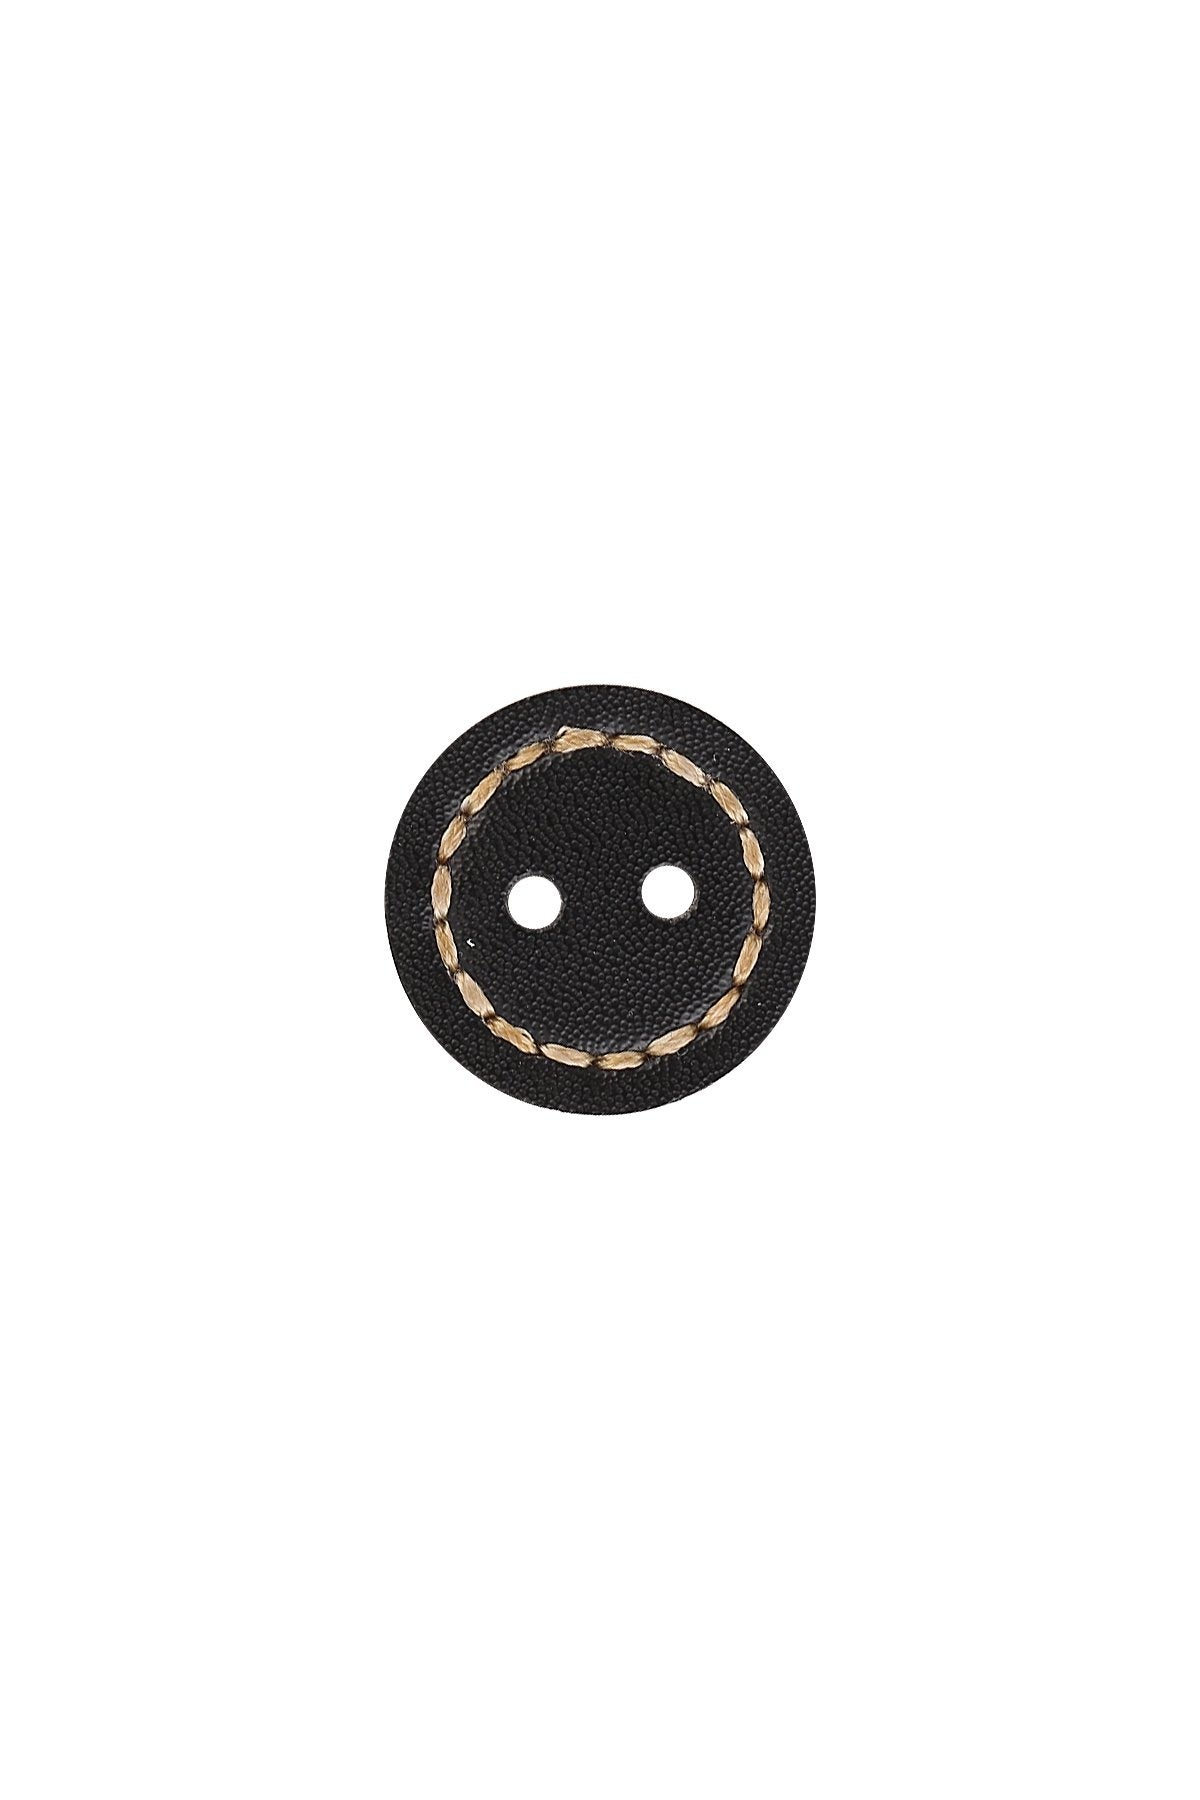 Buy PU Leather Coat Buttons on Jhonea at Best Prices – JHONEA ACCESSORIES